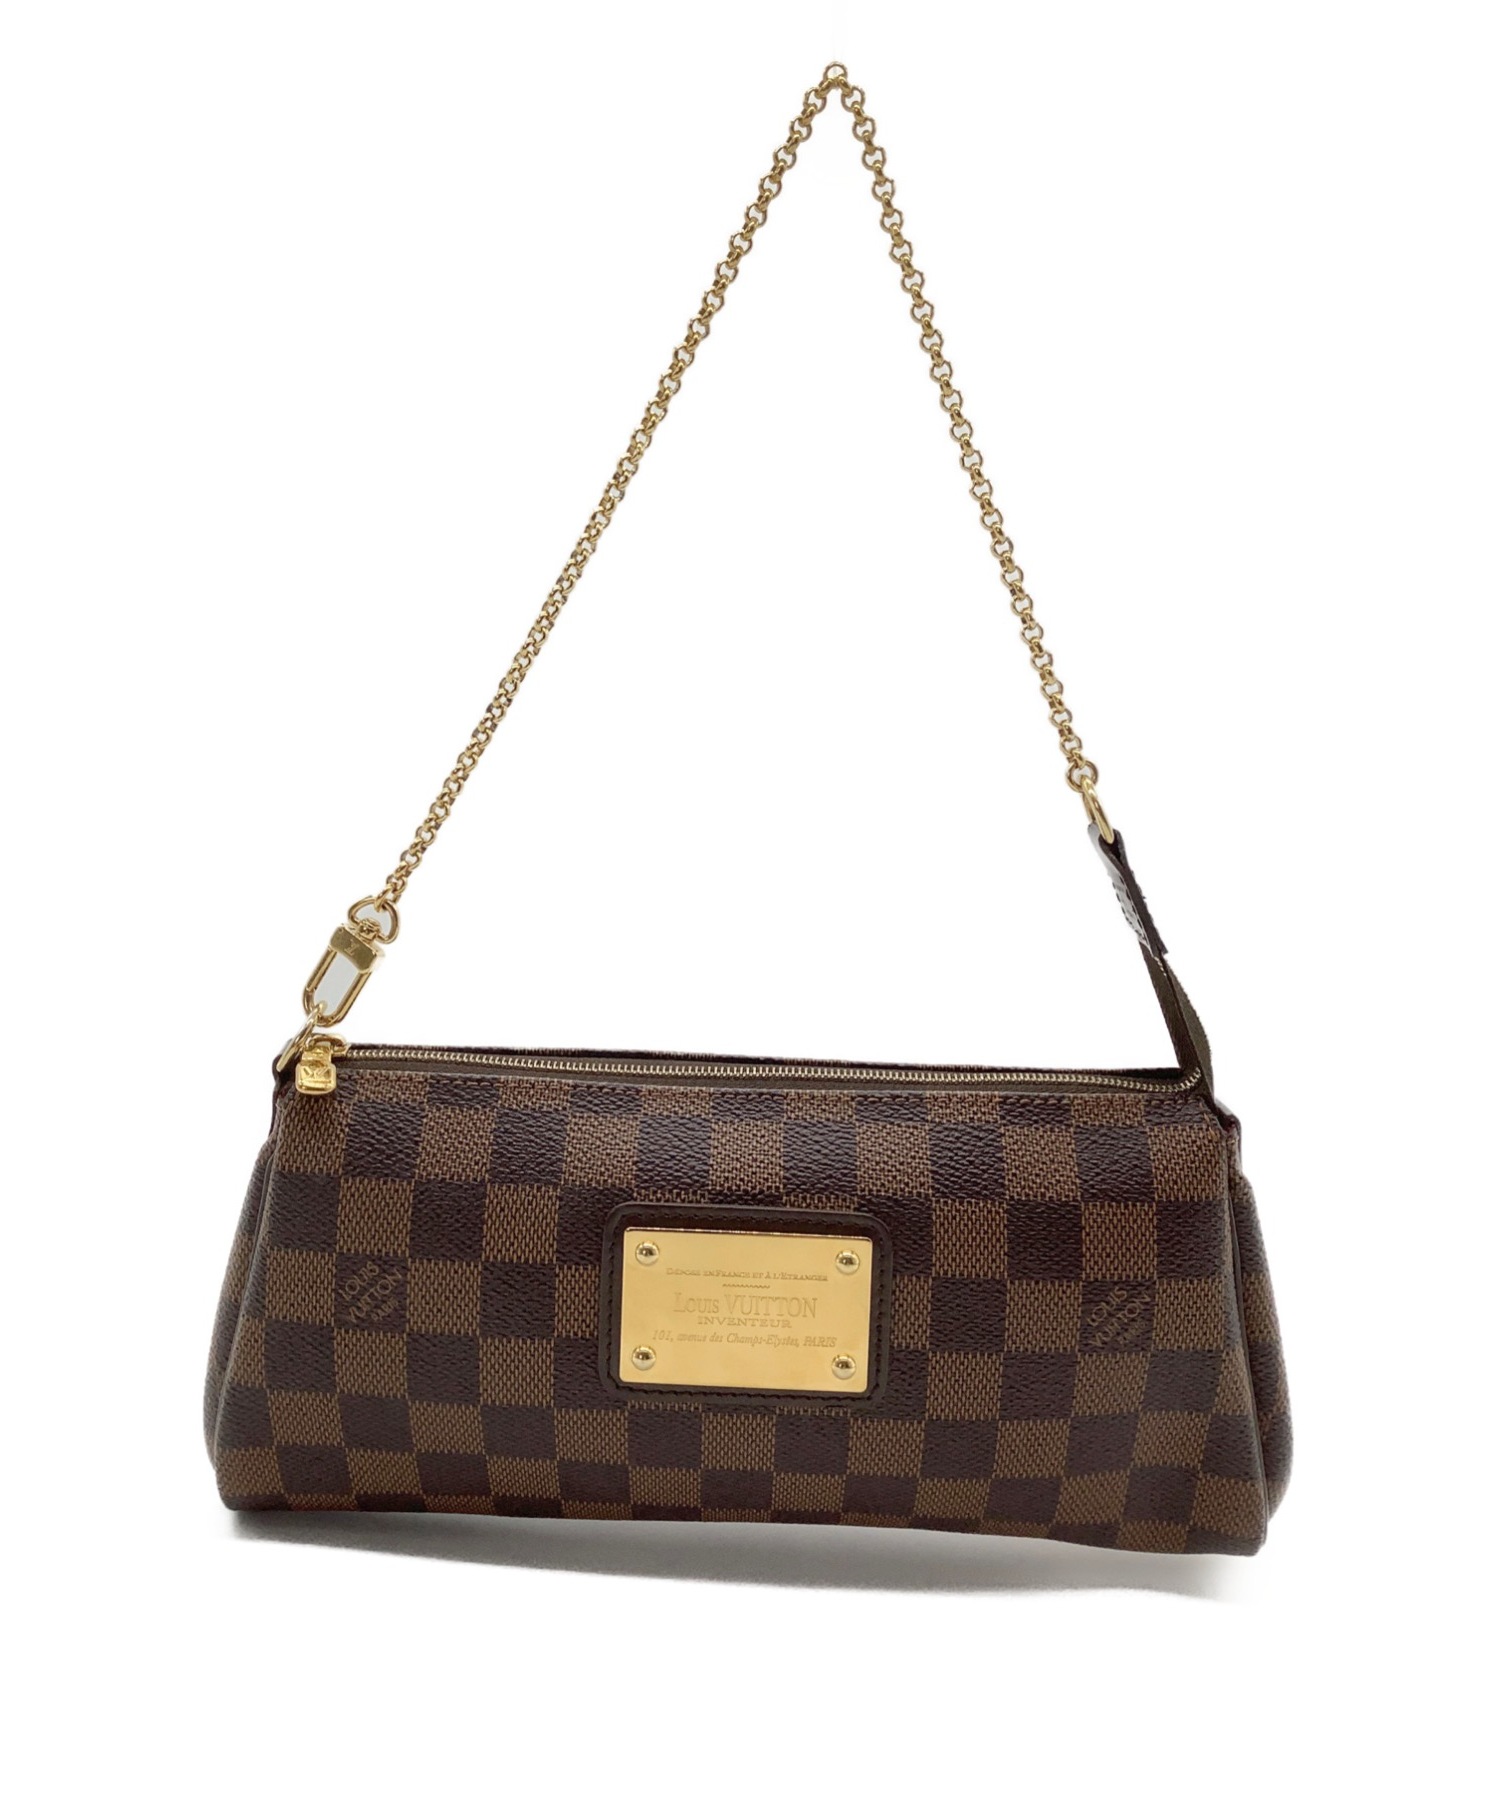 LOUIS VUITTON (ルイヴィトン) チェーンショルダーバッグ ブラウン ダミエ N55213 AA3182